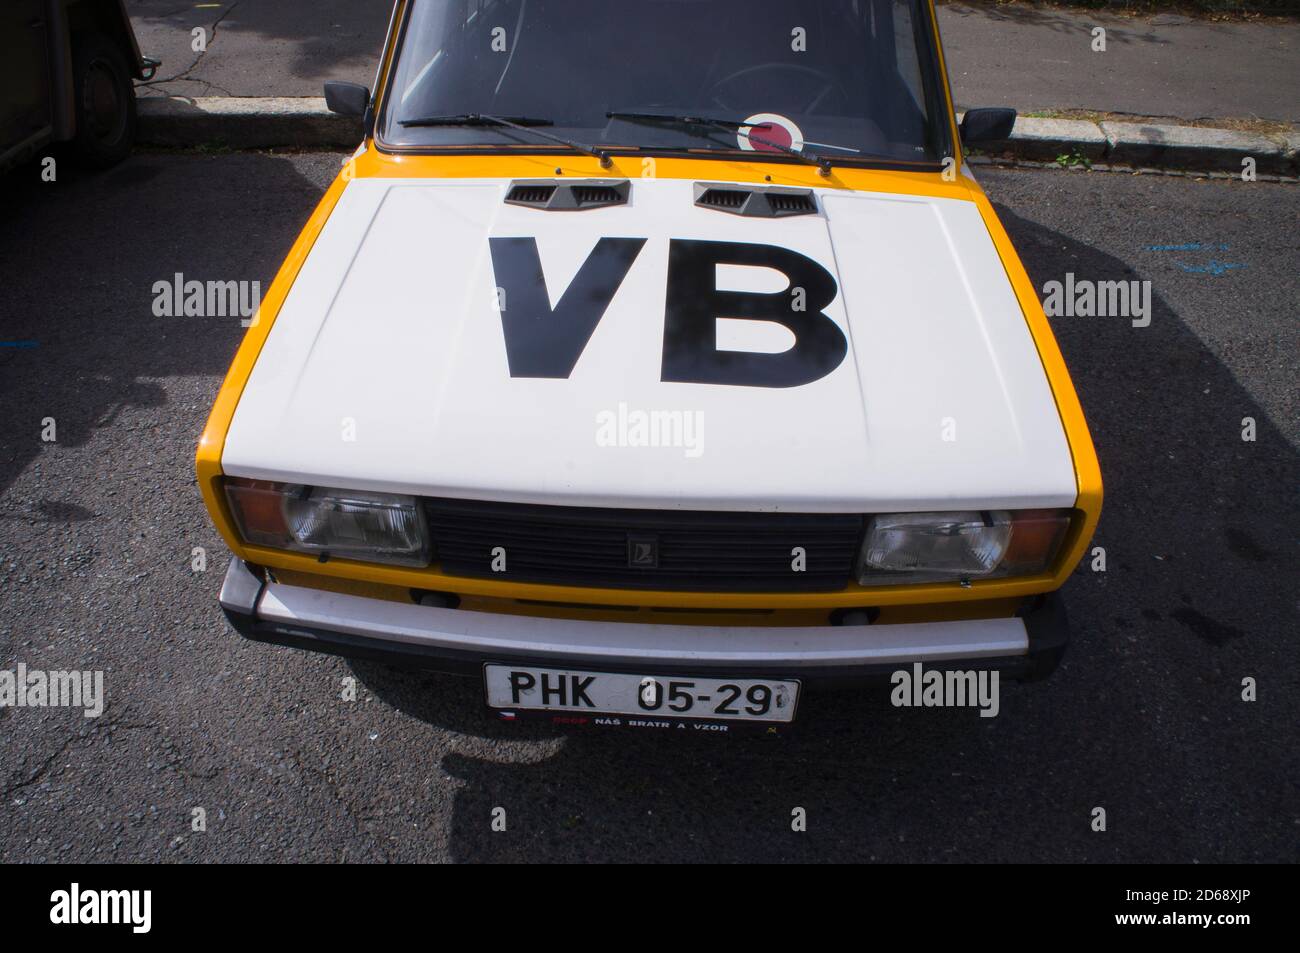 The Lada VAZ 2107 combi veteran car, VB, Public Security, a branch of the National Security Corps, parked in front of the Restaurant and hotel Beranek Stock Photo